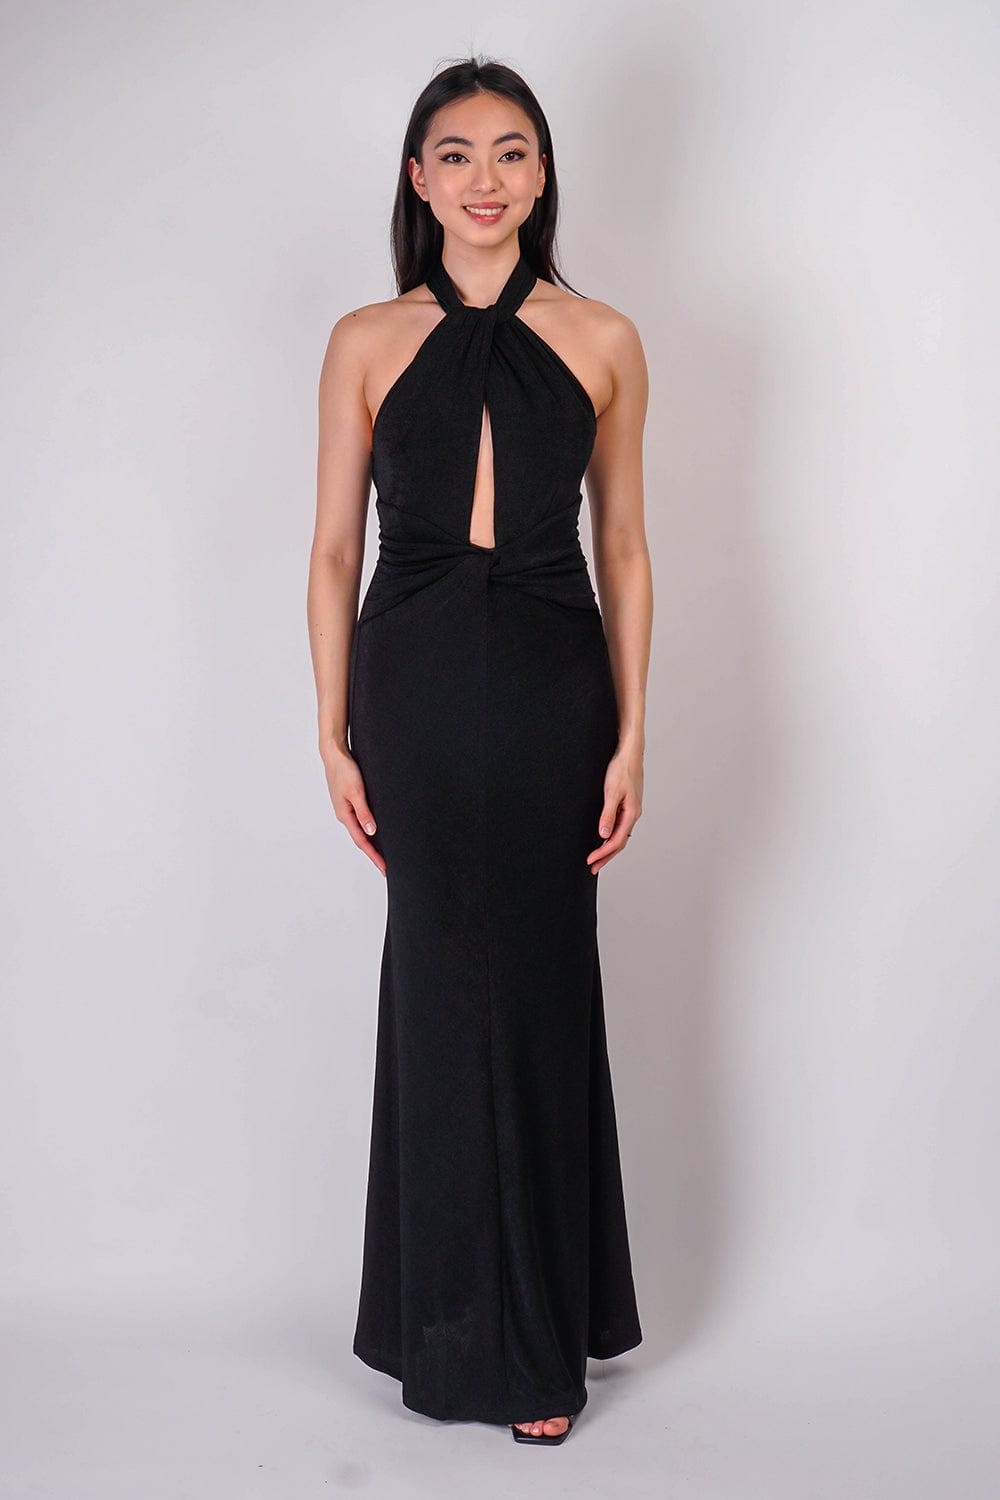 DCD Gowns Black Halter Open Front Jersey Gown